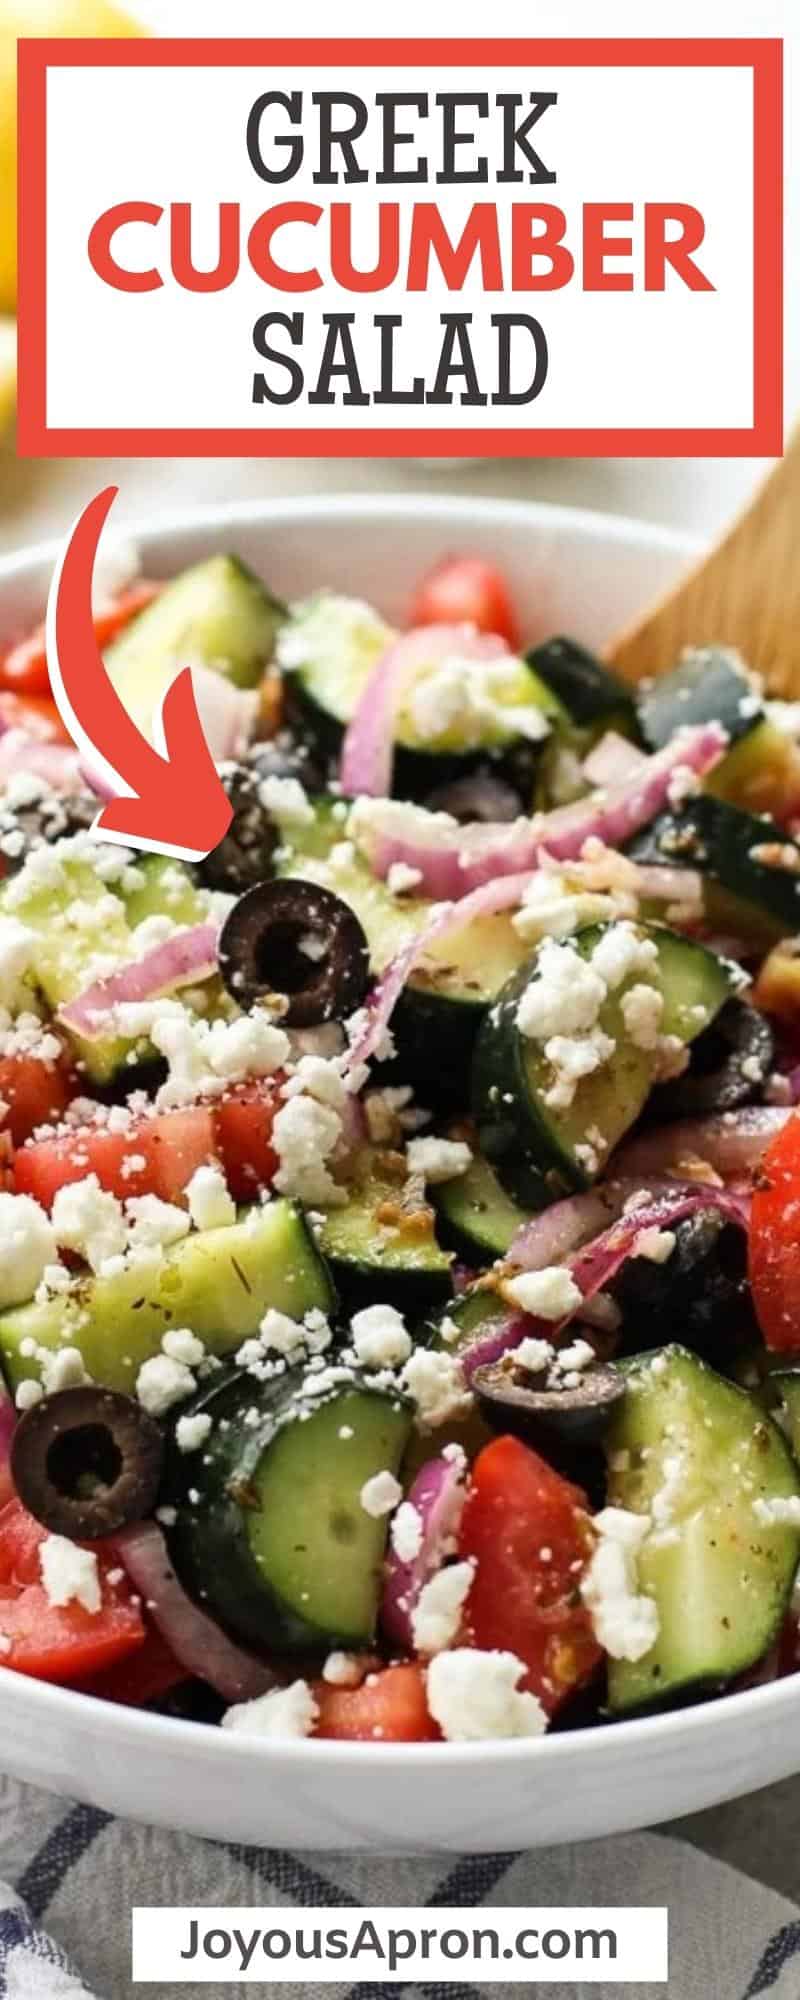 Greek Cucumber Salad - healthy and easy no cook vegetable side dish, perfect for summer dinners and cookout. Cucumbers, tomatoes, red onions, black olives, and feta tossed in a zesty homemade Greek Lemon Vinaigrette dressing. via @joyousapron